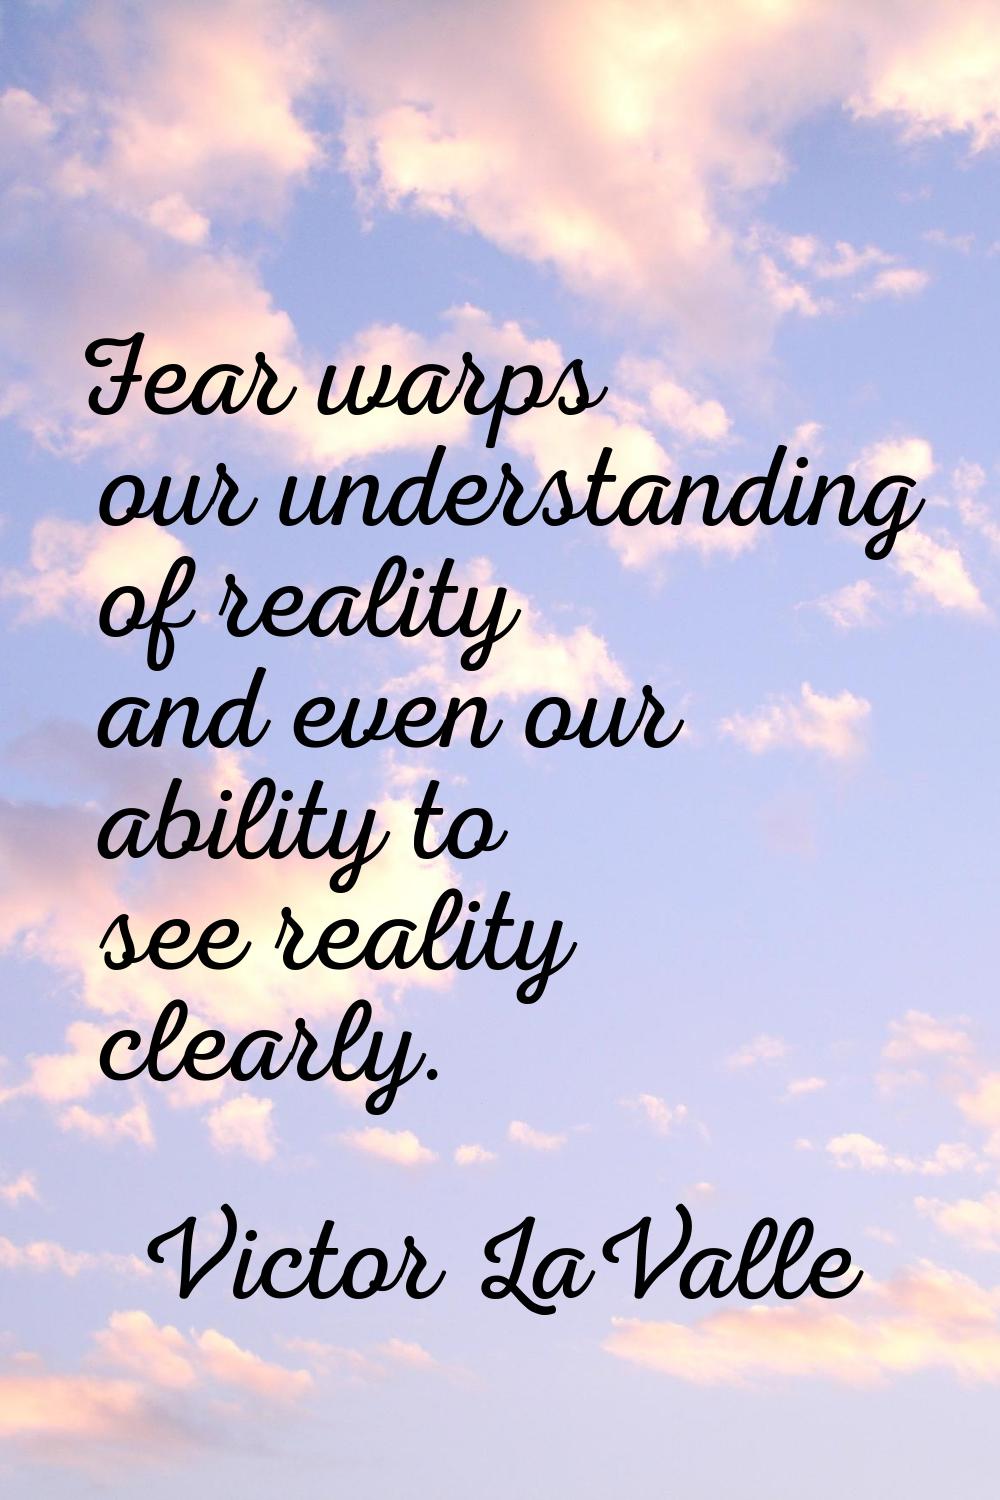 Fear warps our understanding of reality and even our ability to see reality clearly.